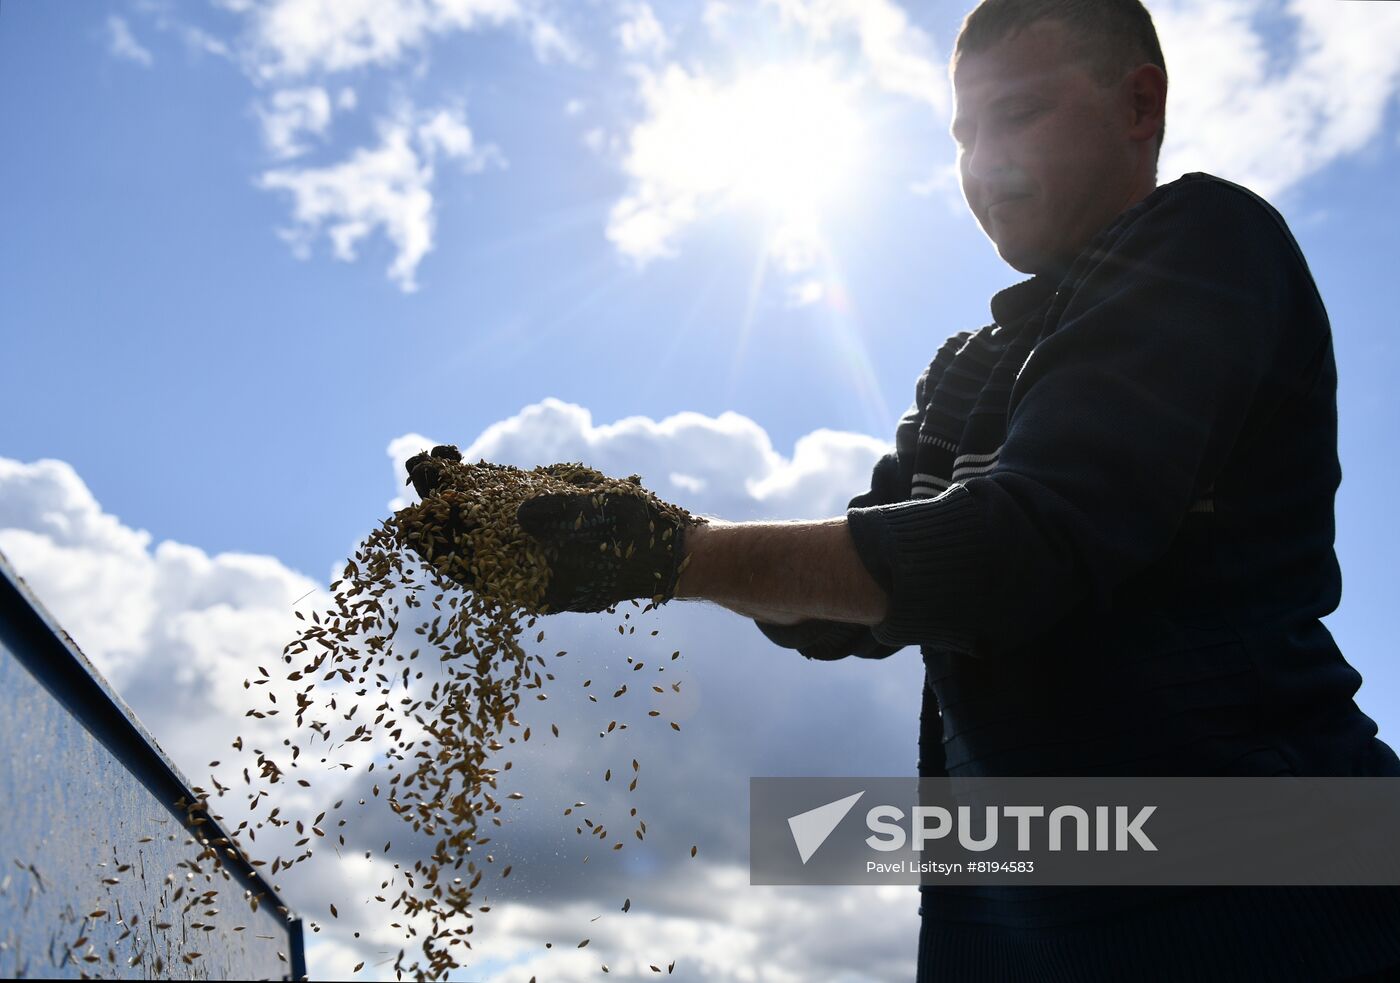 Russia Agriculture Sowing 